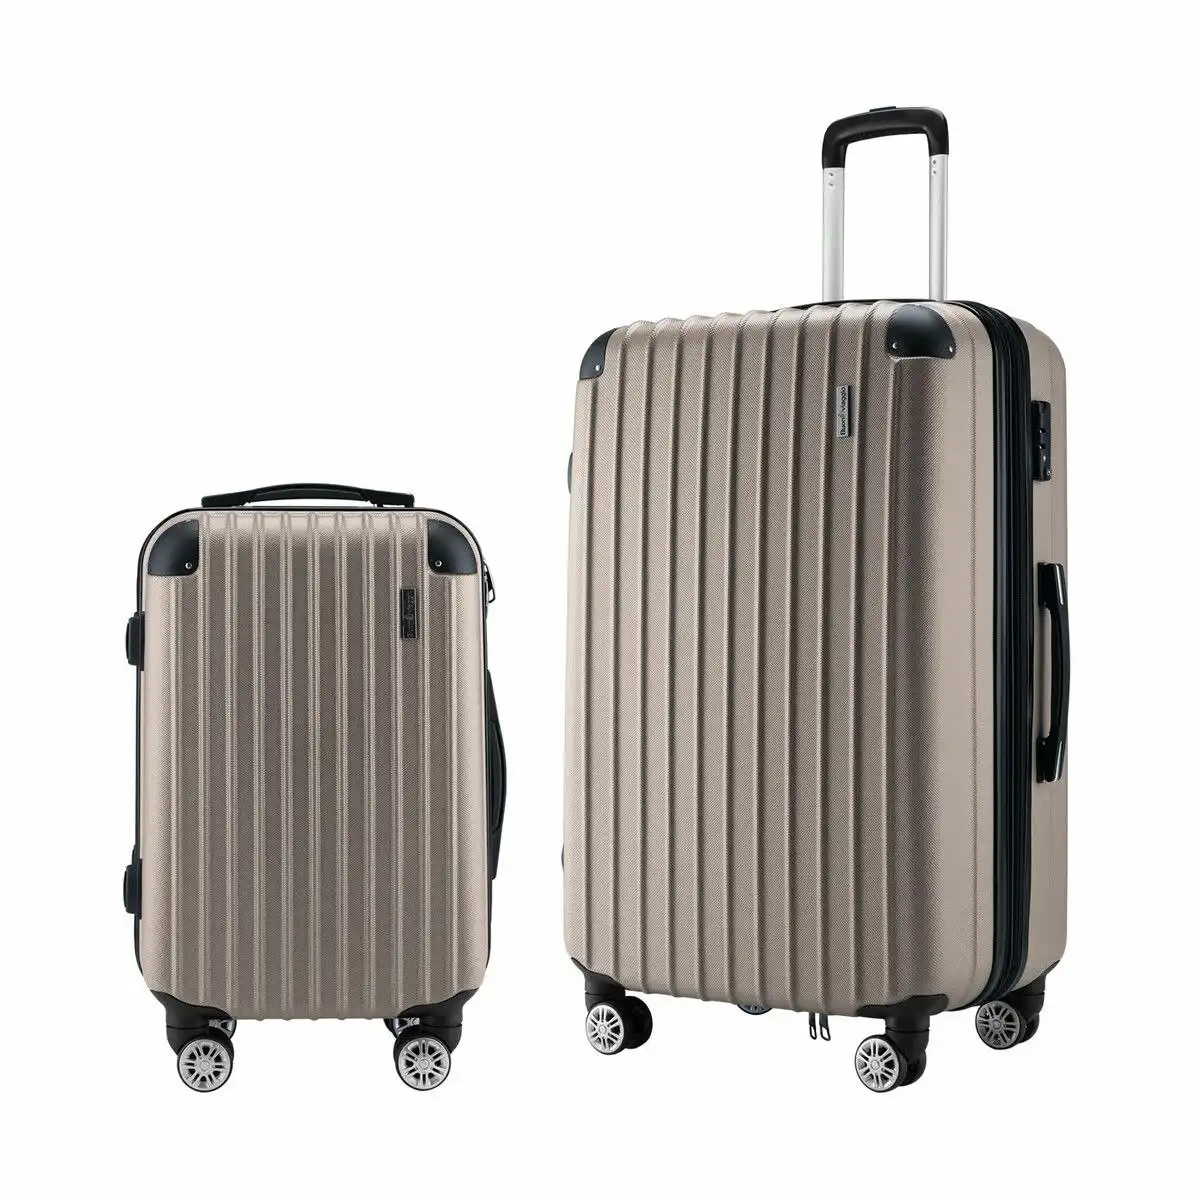 Buon Viaggio 2 Piece Suitcases Luggage Set Carry On Travel Case Cabin Hard Shell Travelling Bags Hand Baggage Lightweight Rolling TSA Lock Champagne